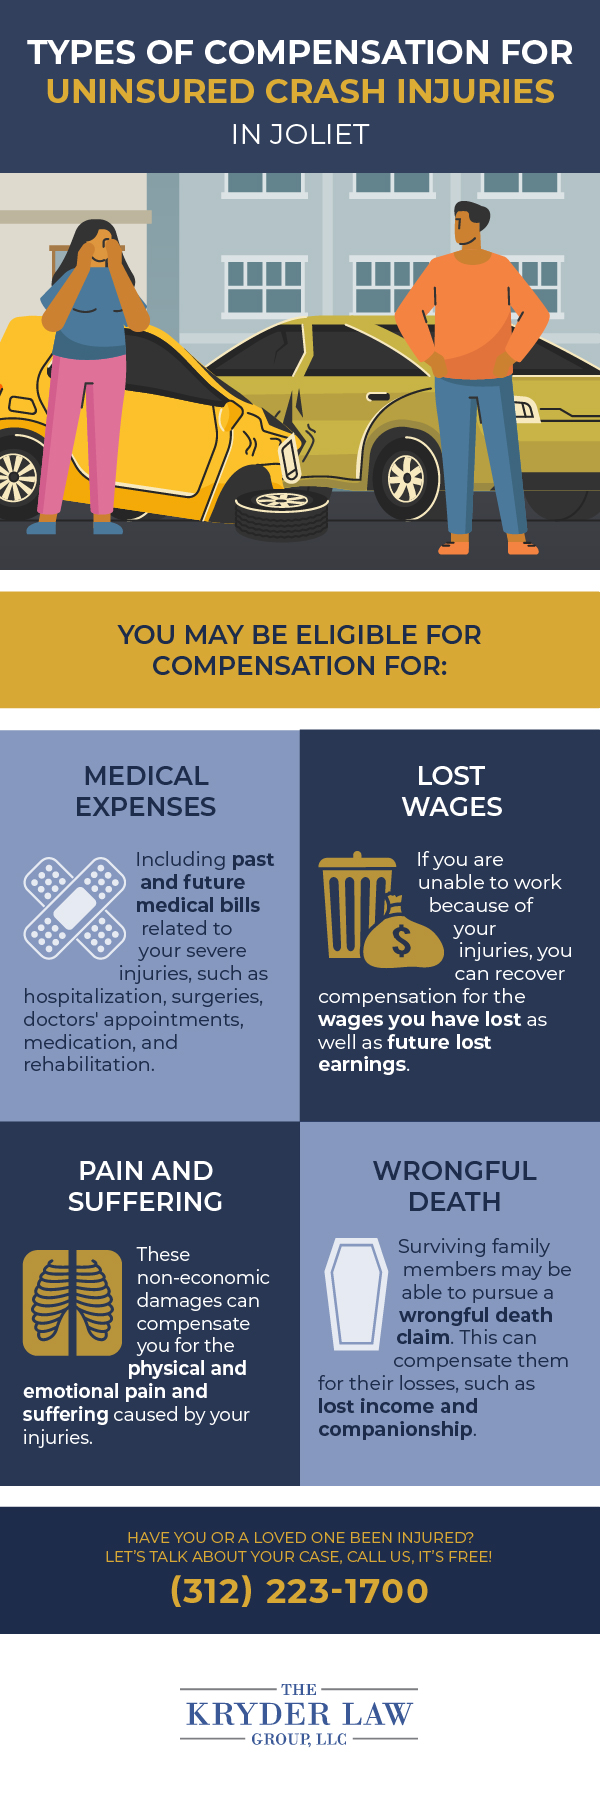 Types of Compensation for Uninsured Crash Injuries in Joliet Infographic